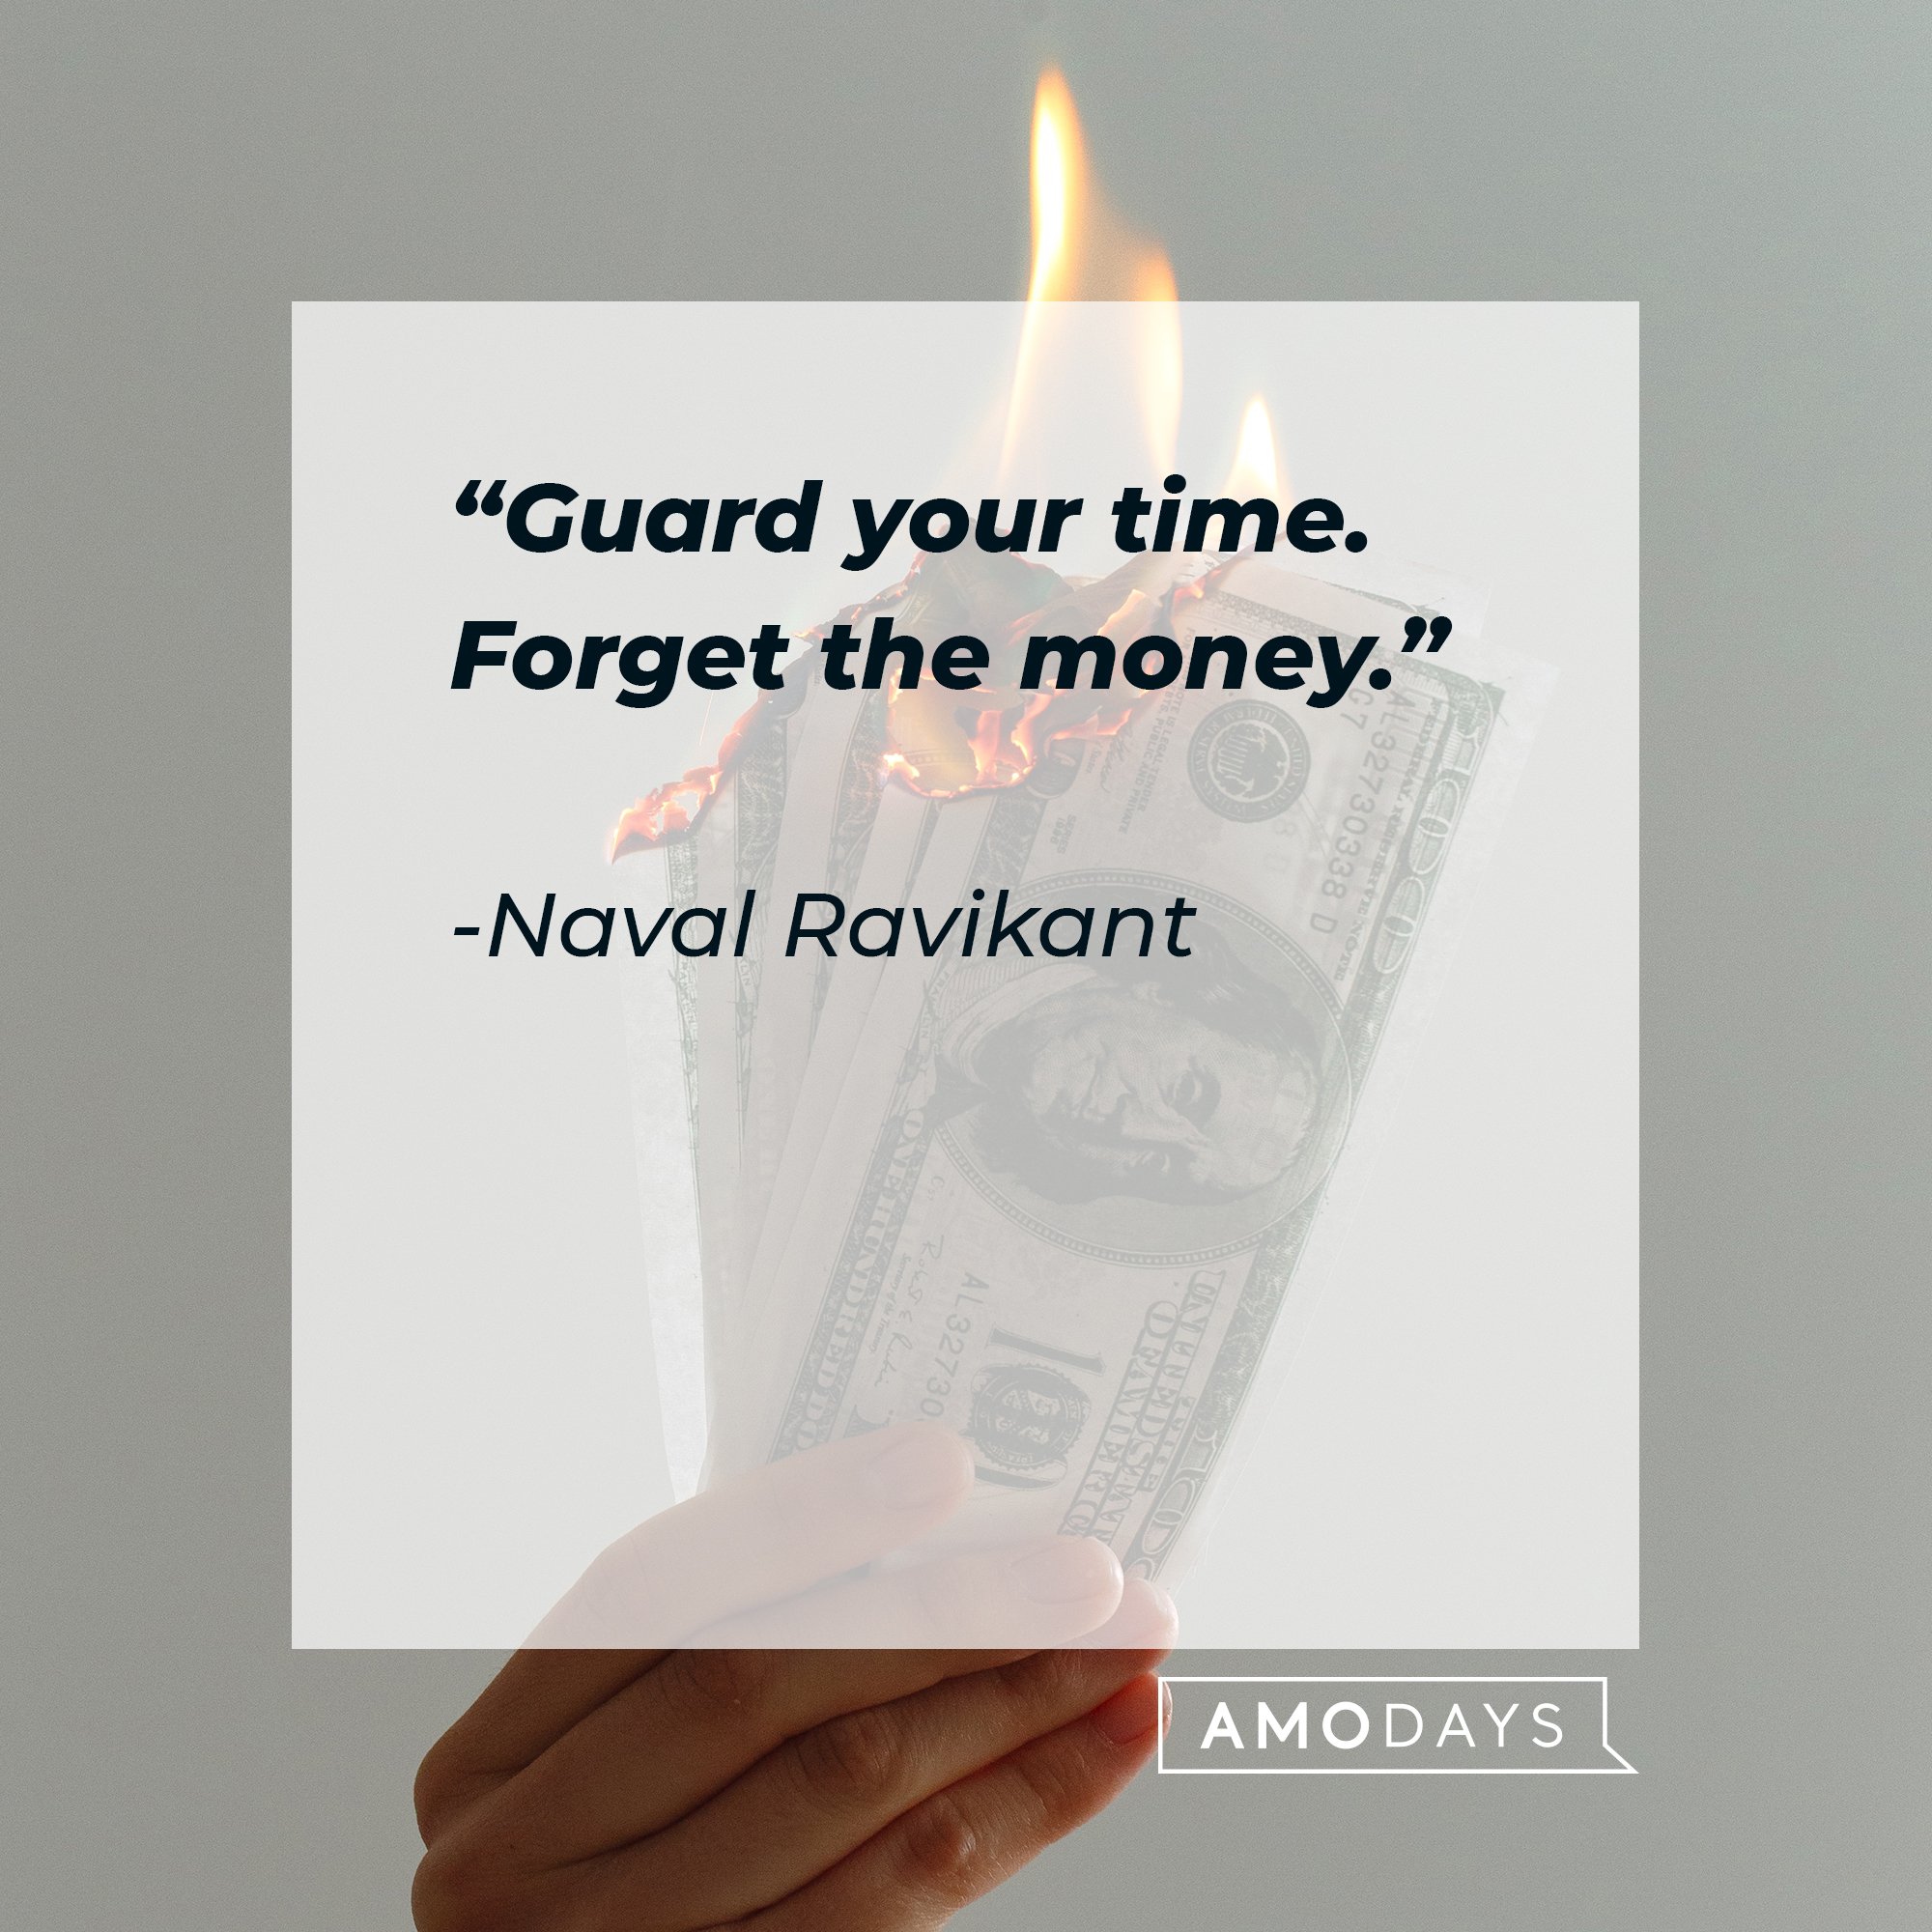 Naval Ravikant's quote: "Guard your time. Forget the money." | Image: AmoDays